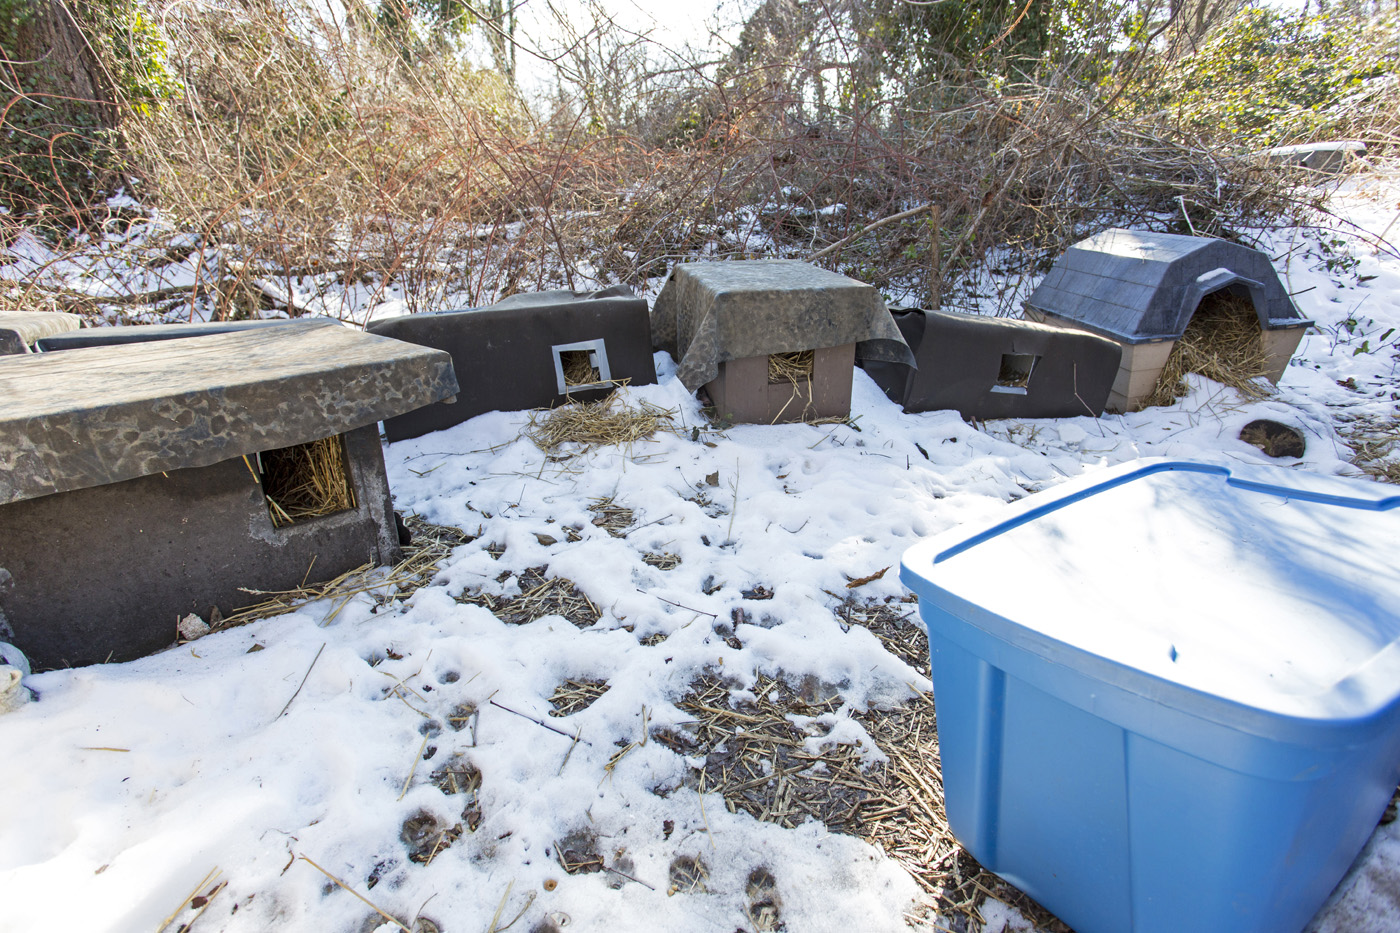 winter home for feral cats